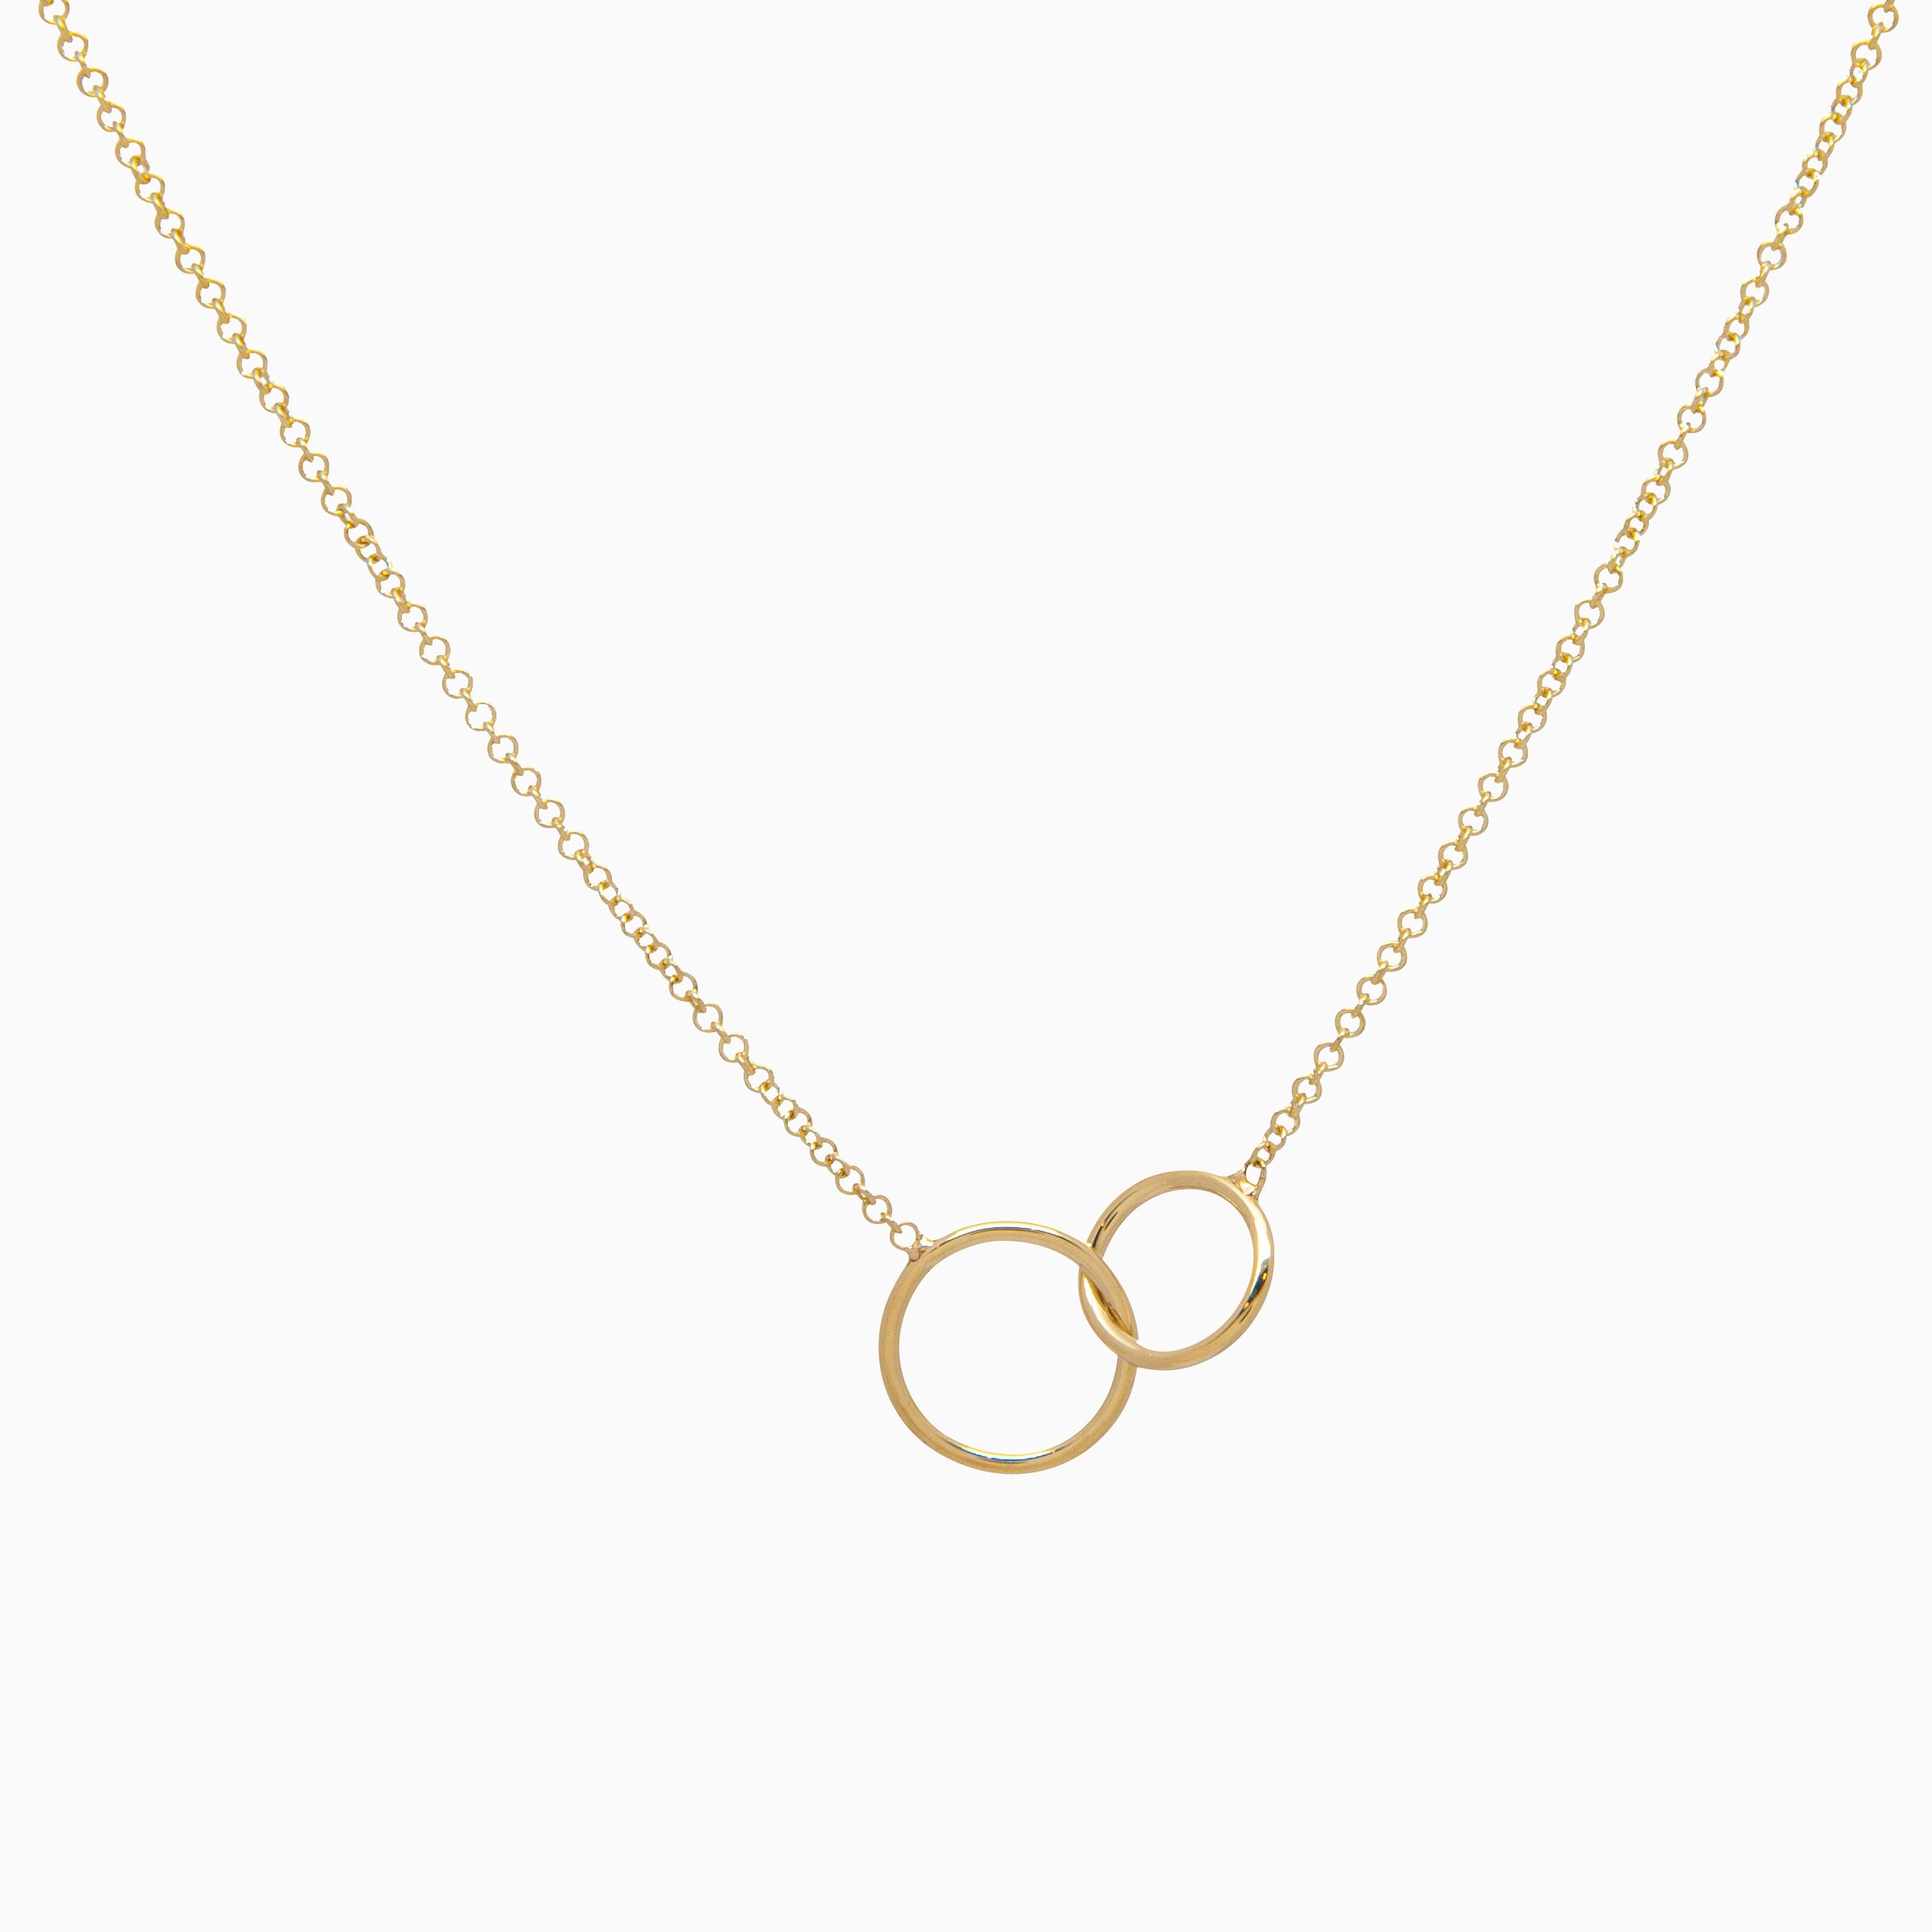 14k Yellow Gold Coveted Connections Linked Ring Necklace